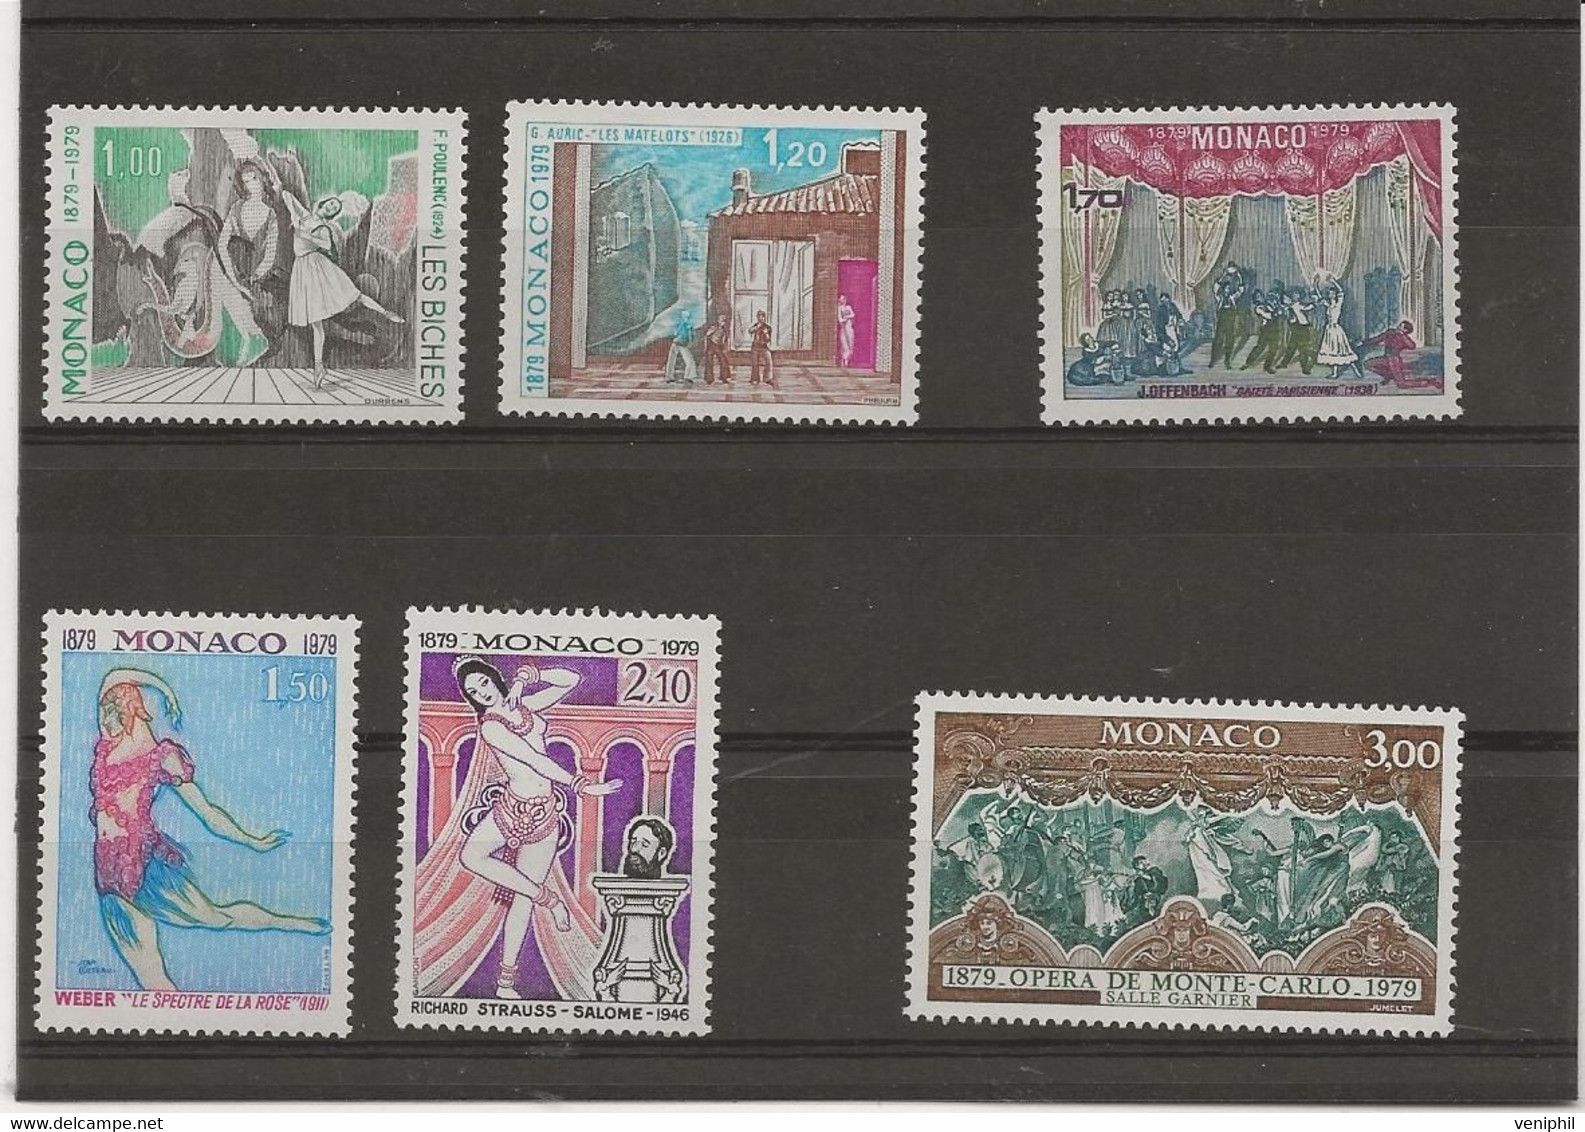 MONACO - TIMBRES N° 1190 A 1195 - NEUF X - ANNEE 1979 - Unused Stamps